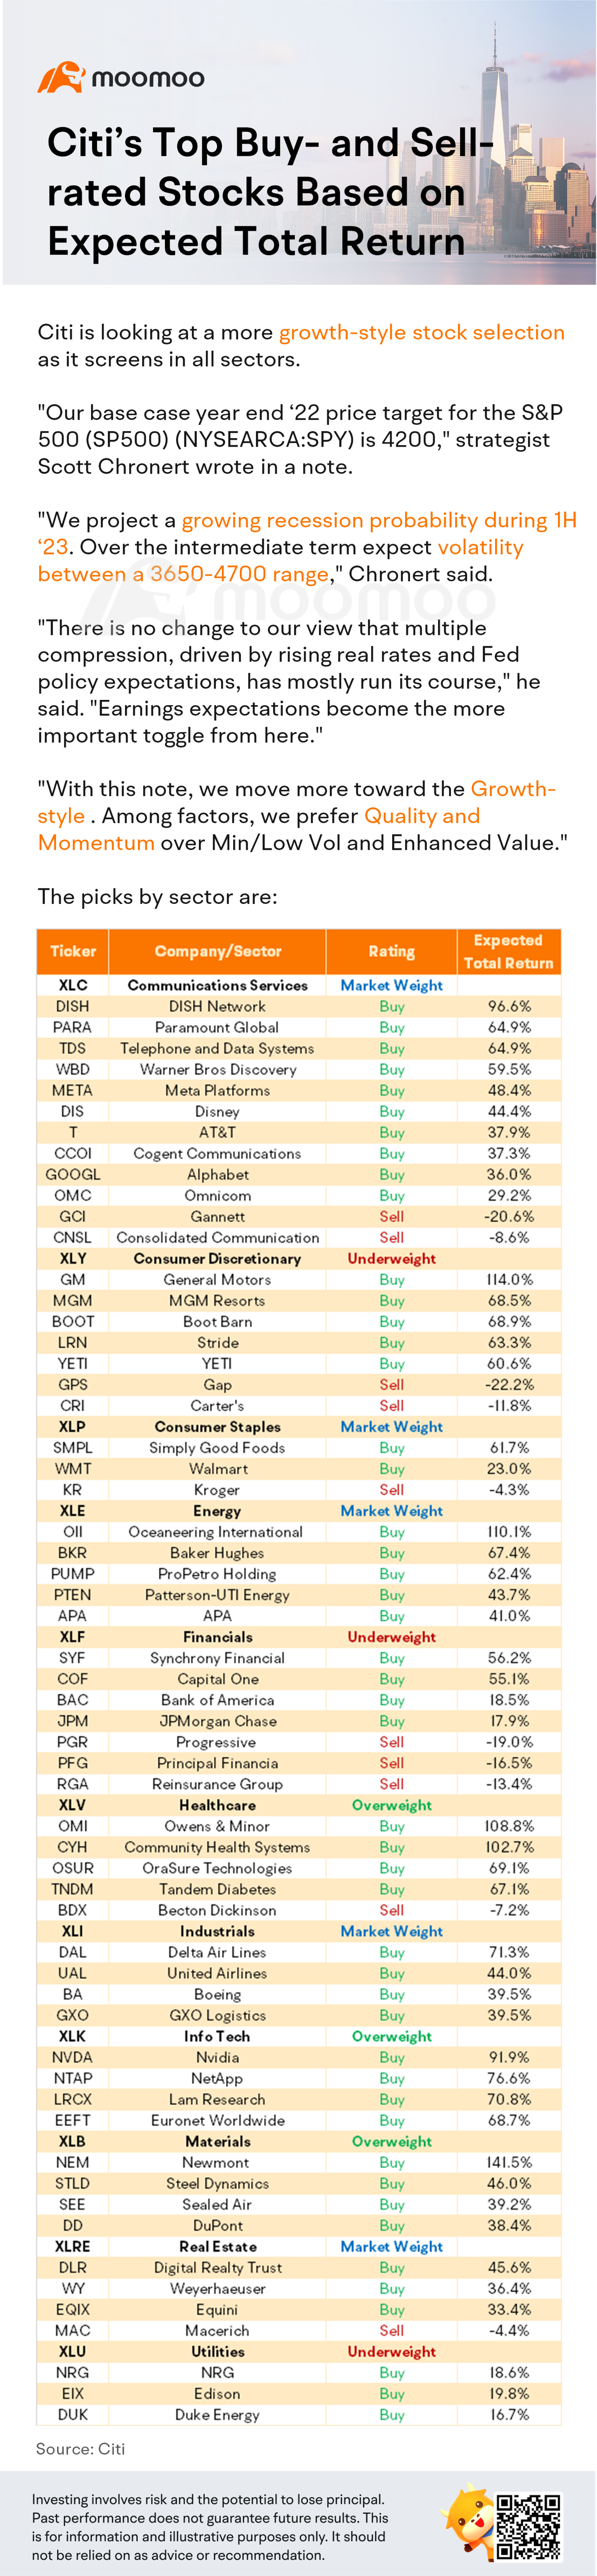 Citi&#039;s Top Buy-and Sell-rated Stocks Based on Expected Total Return